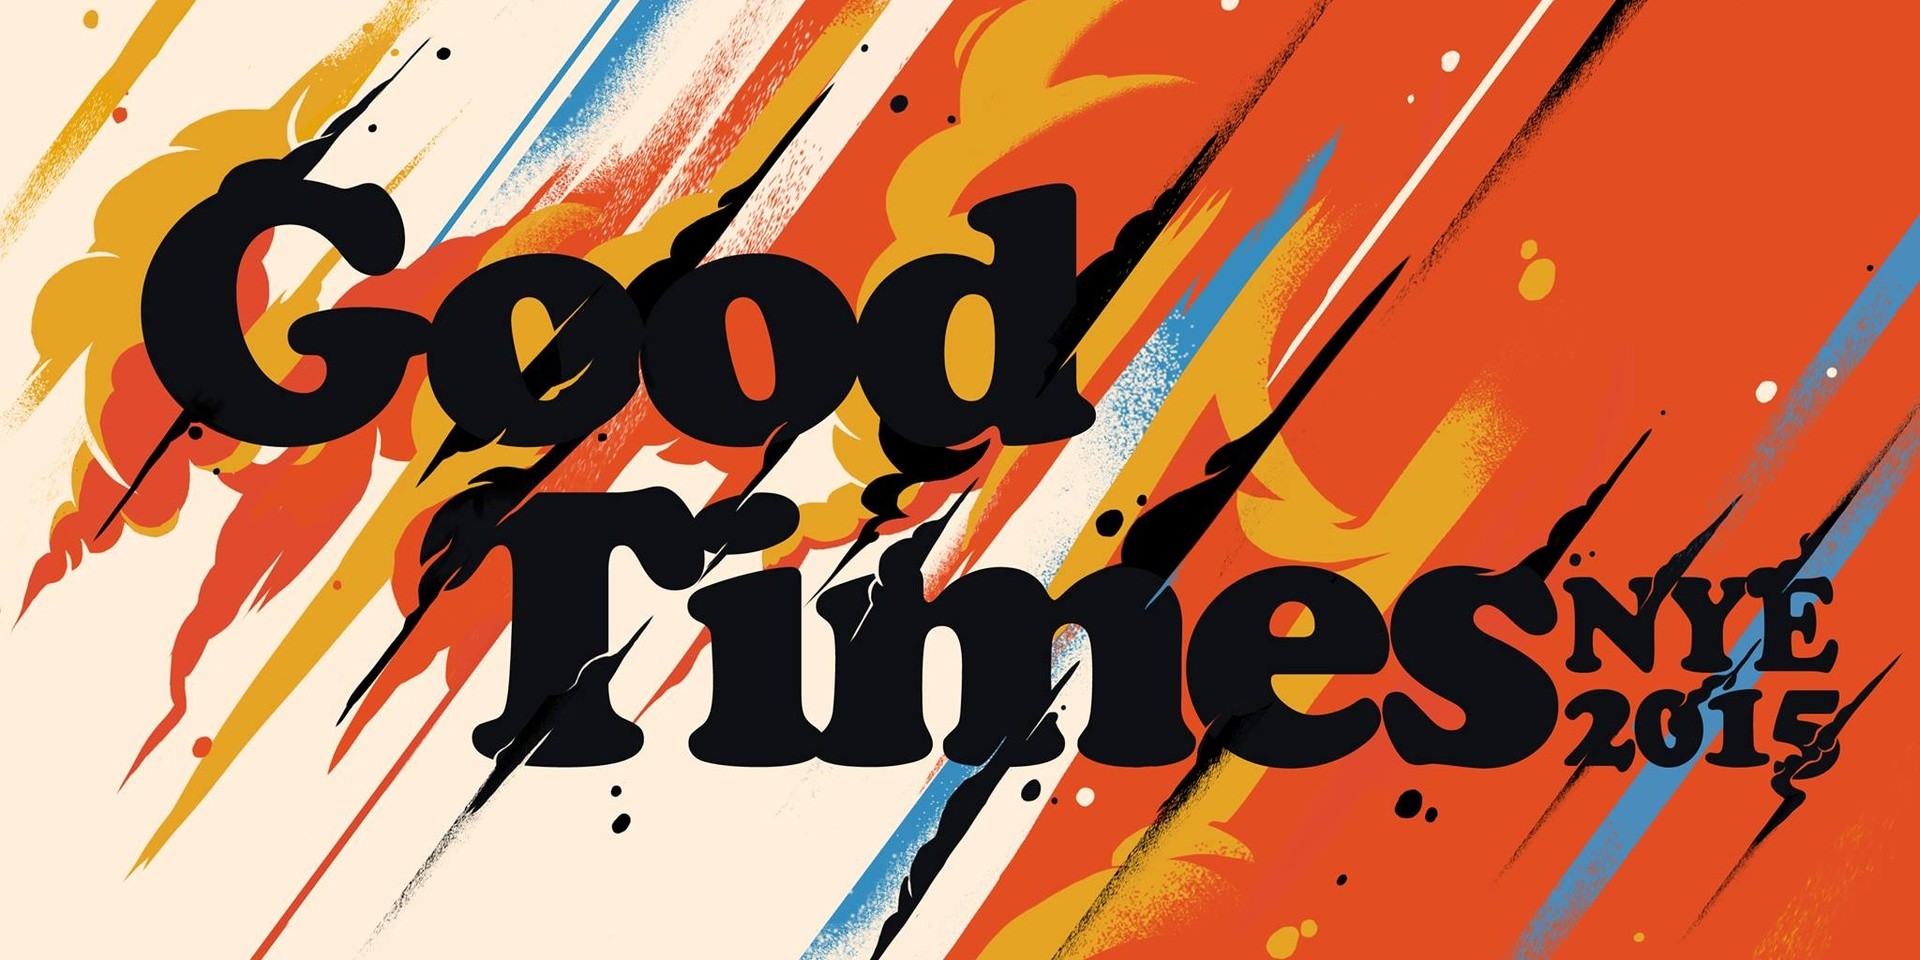 Good Times teams with Laneway, Dunce, Phyla & ATTAGIRL for an epic NYE party